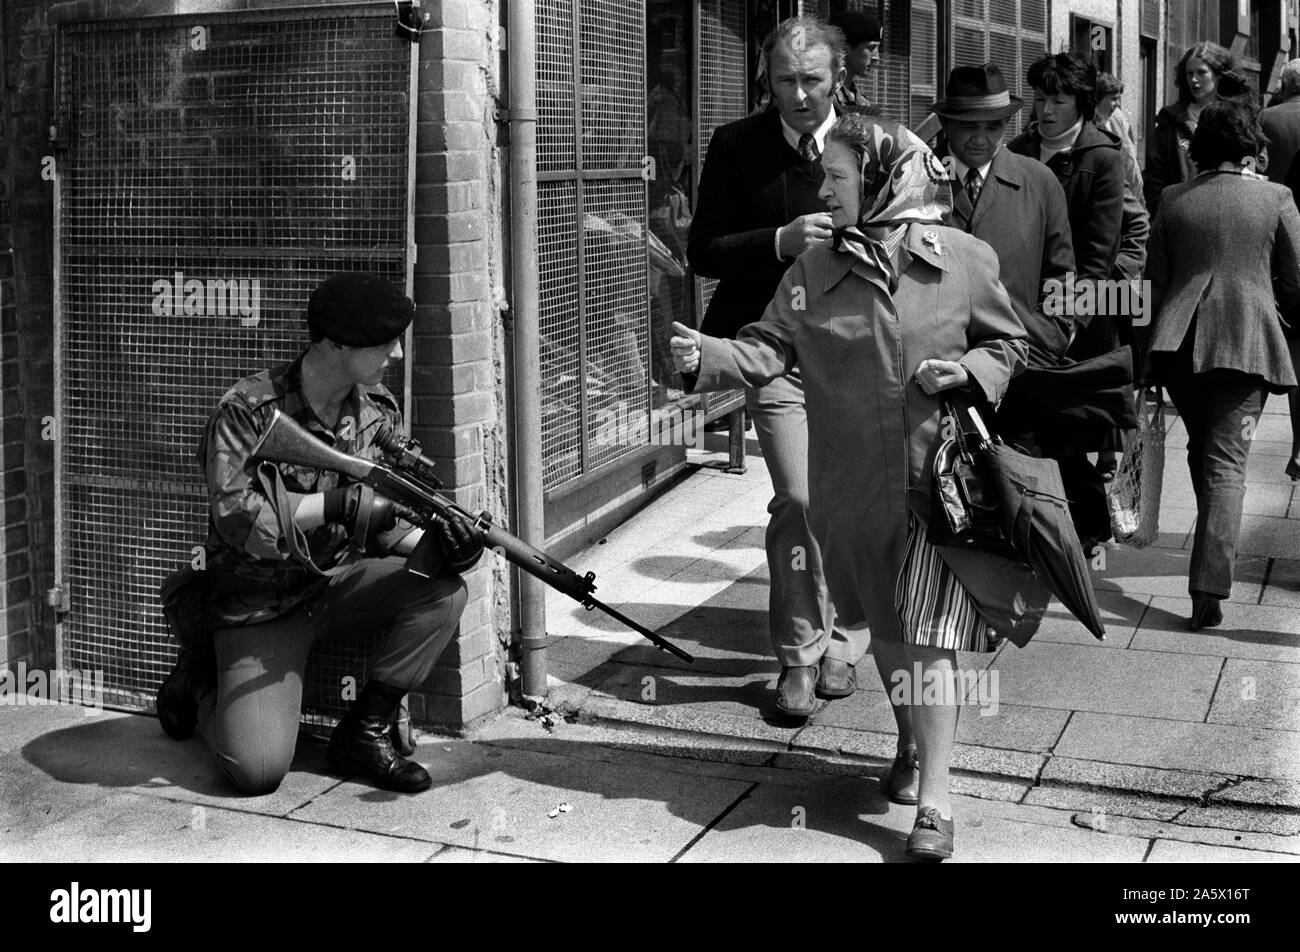 British soldiers The Troubles 1970s, on patrol in Derry city centre Northern Ireland Londonderry. people out shopping daily life  1979 70s UK HOMER SYKES Stock Photo